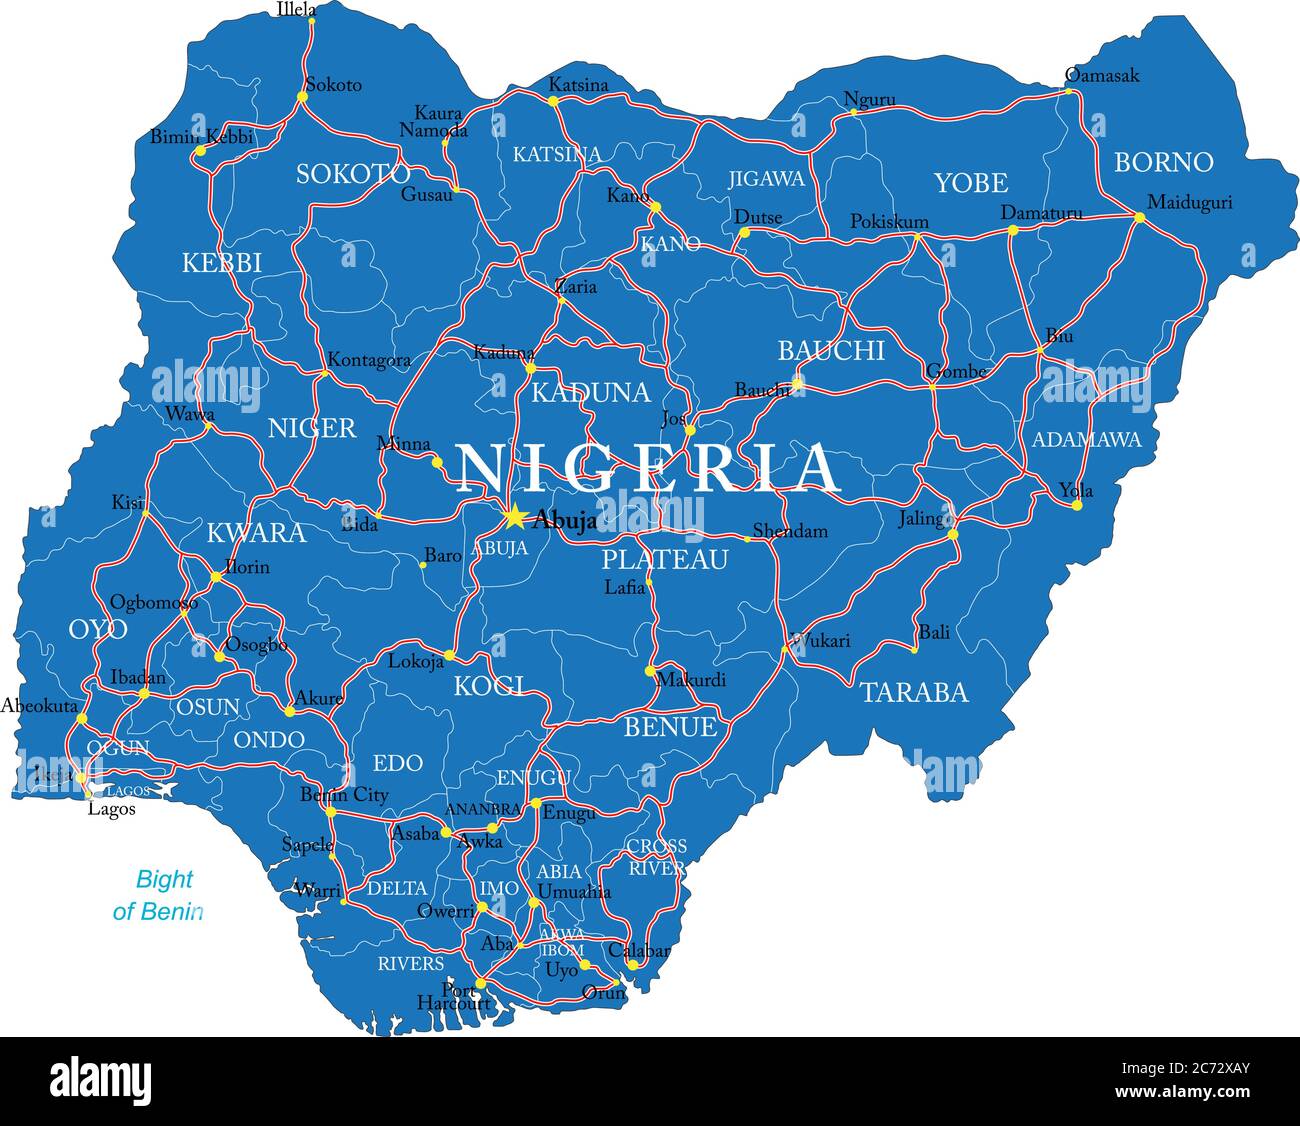 Highly detailed vector map of Nigeria with administrative regions, main cities and roads. Stock Vector